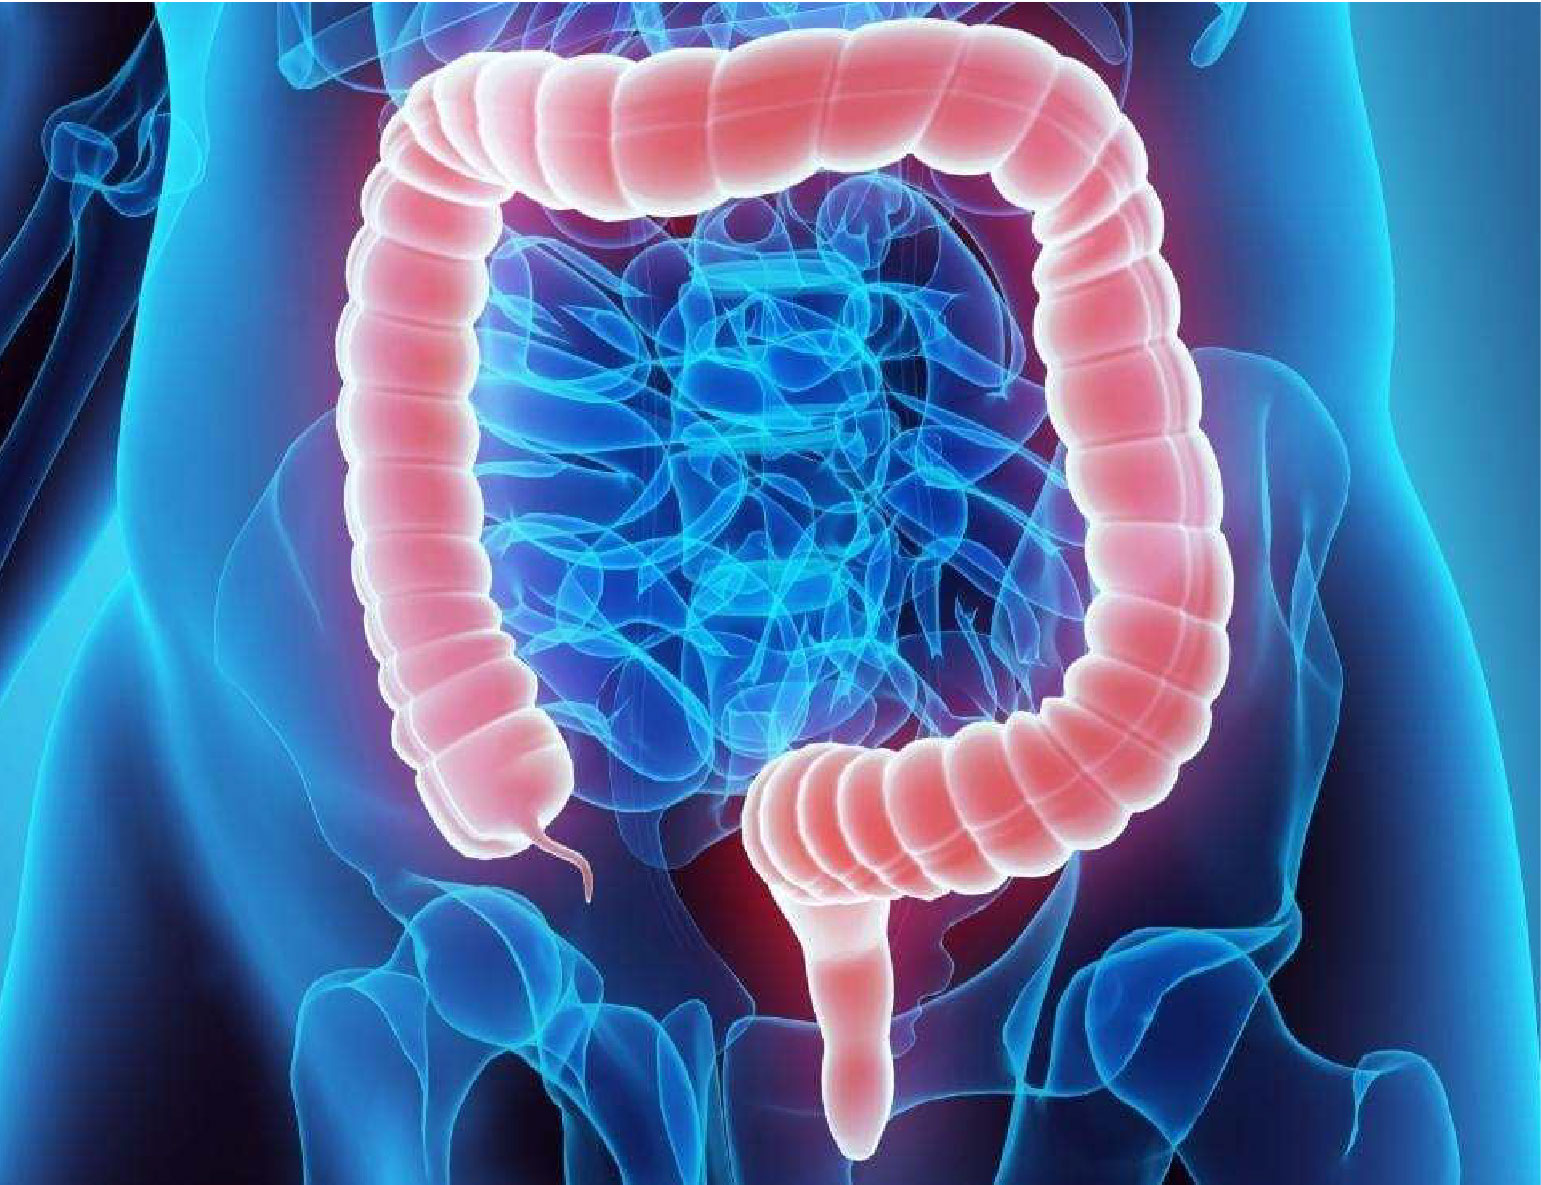 incidence of colorectal